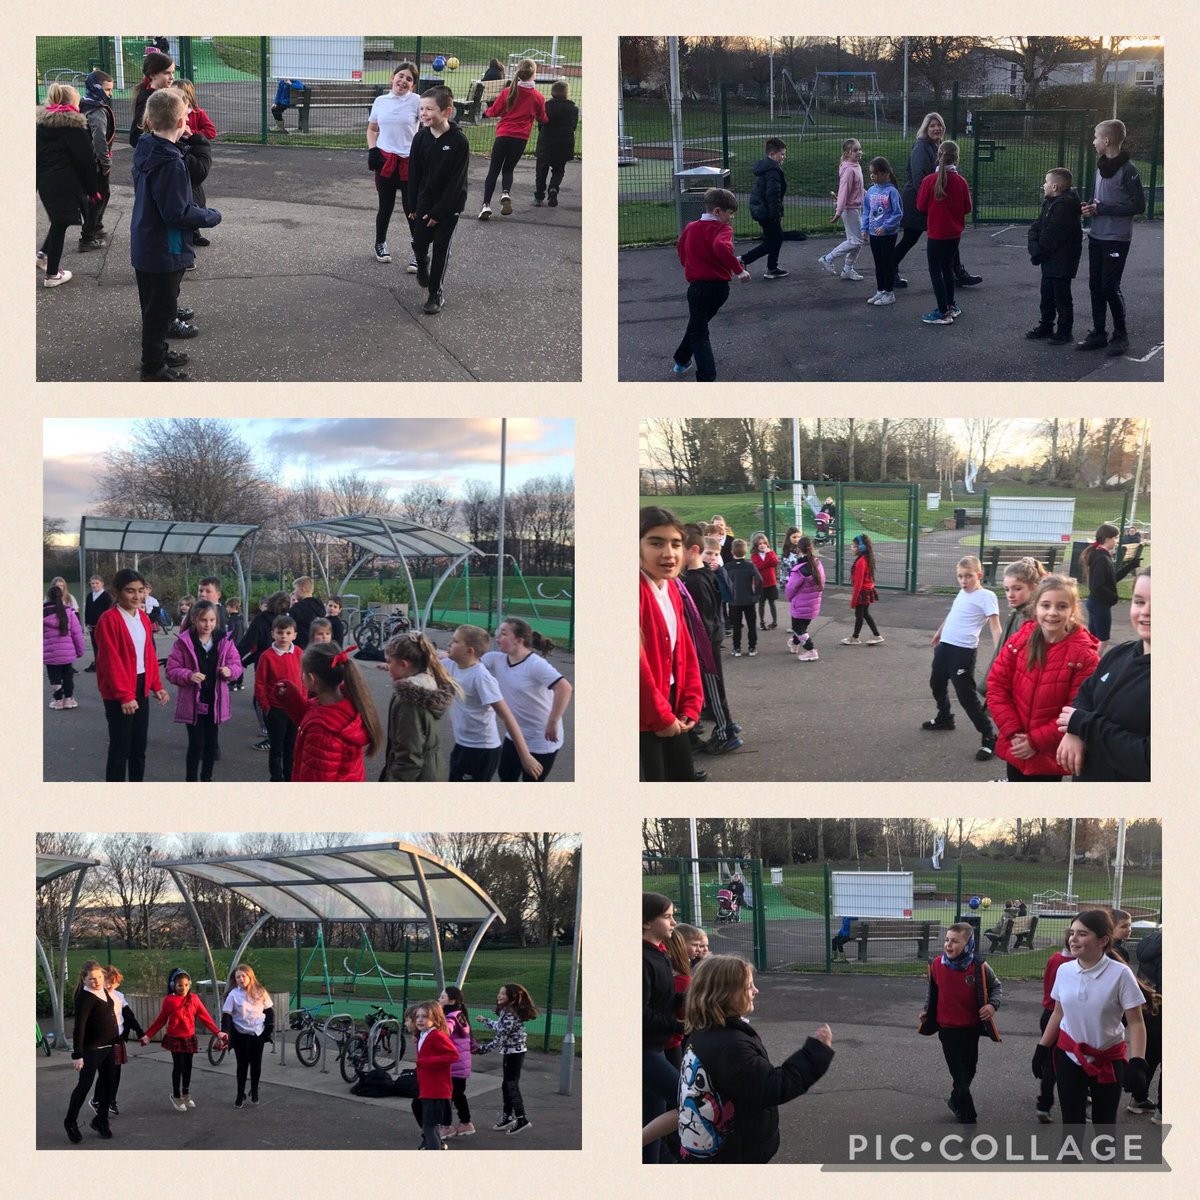 In PE, we have been learning Scottish Country Dances. P4 and P5/6 celebrated St Andrew’s Day together and danced a Canadian Barn Dance, Flying Scotsman and the Military Two Step. #StAndrew’sDay #ScottishCountryDancing